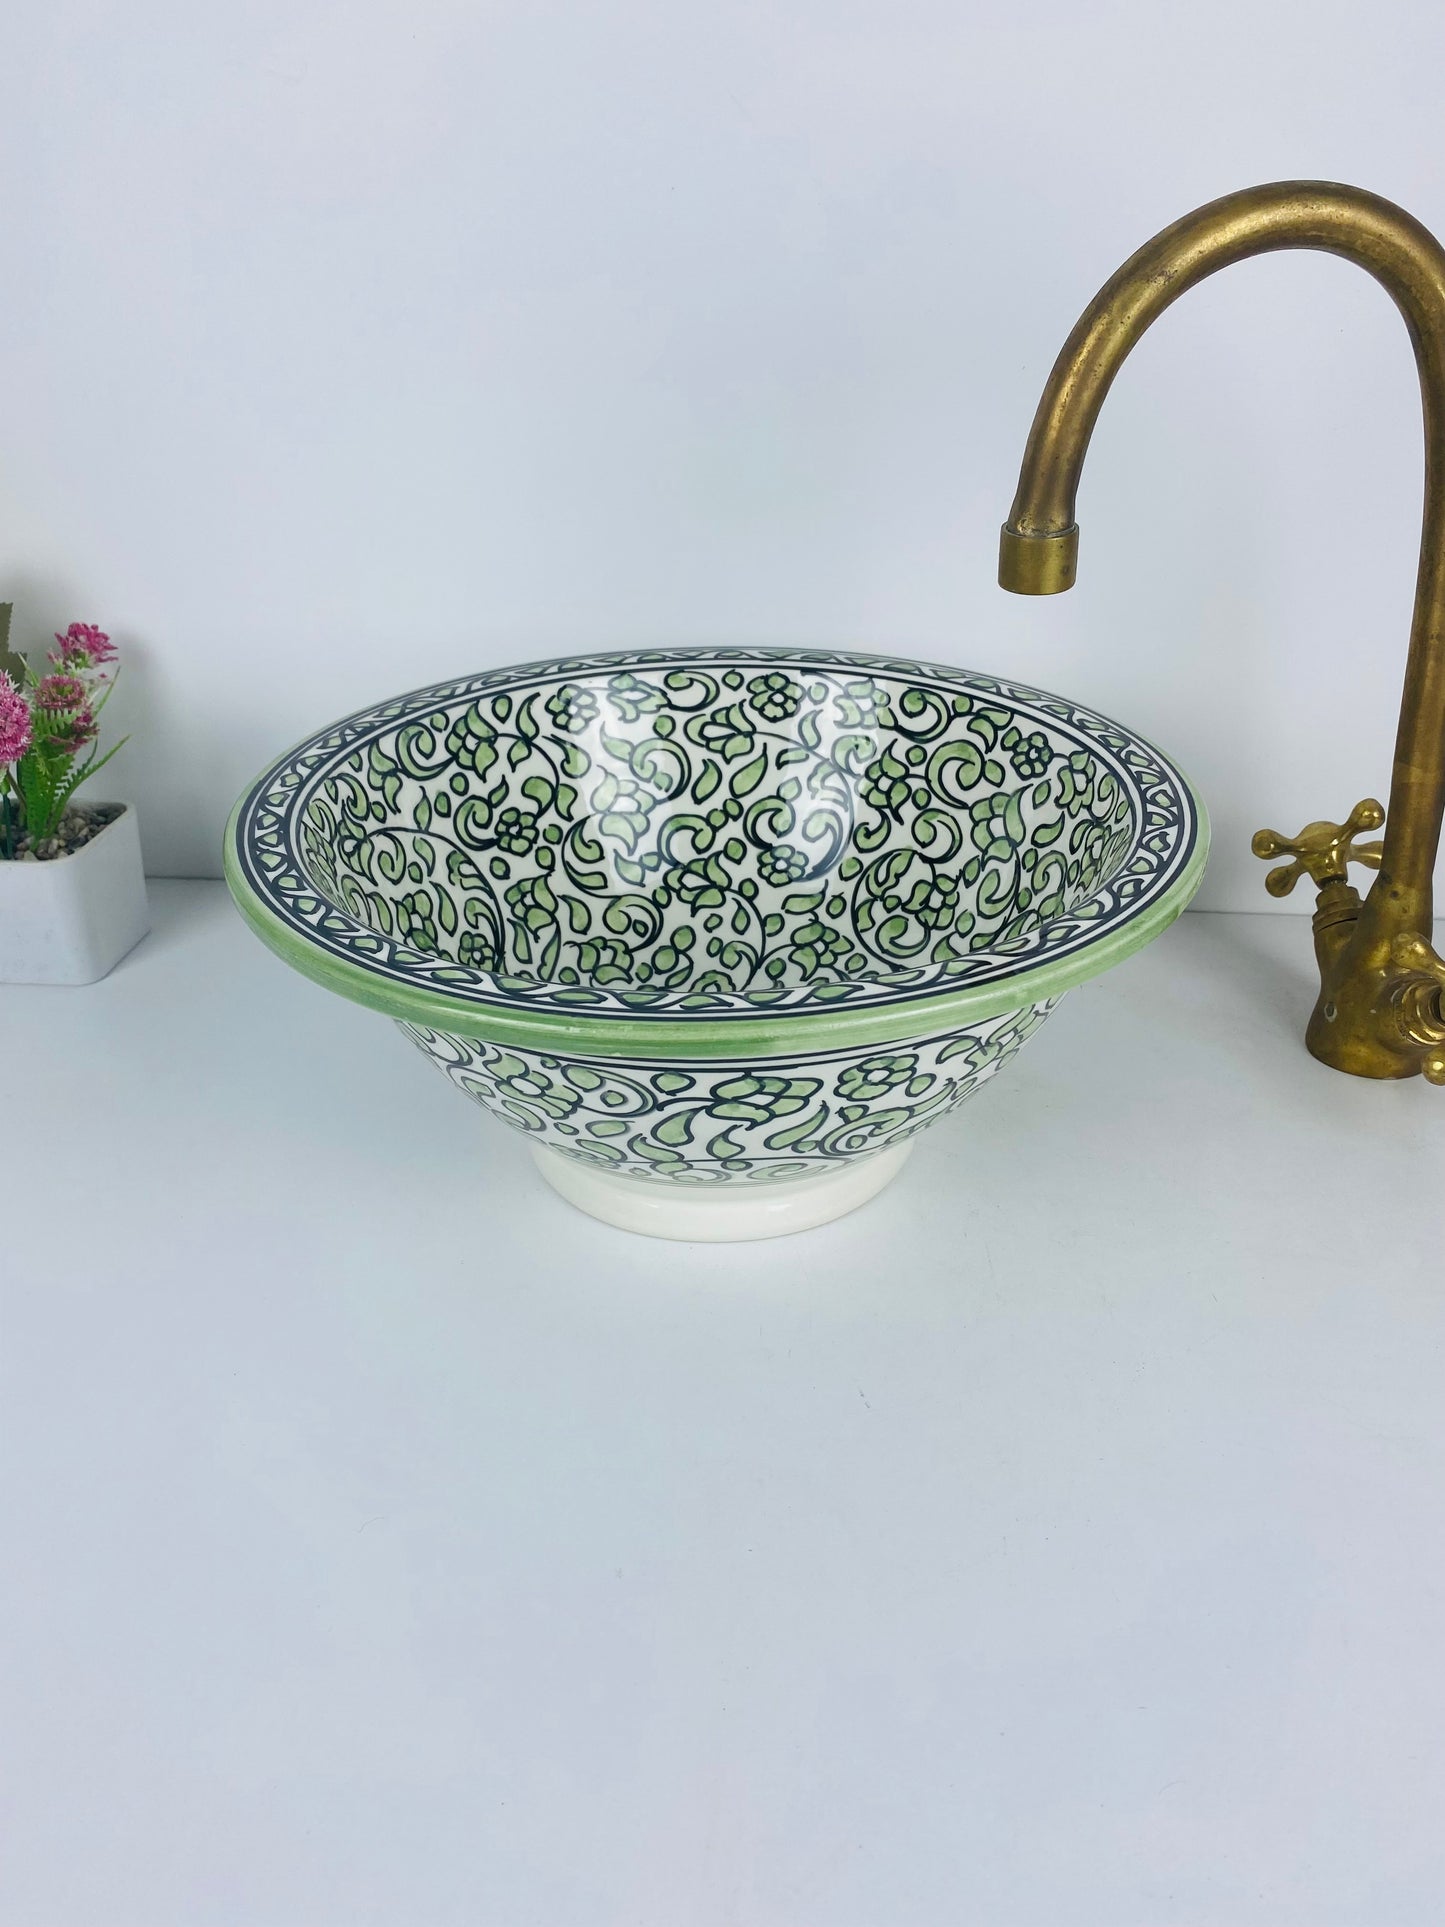 Pistachio Paradise: Handcrafted Ceramic Sink with Garden-Inspired Pistachio Green Hue